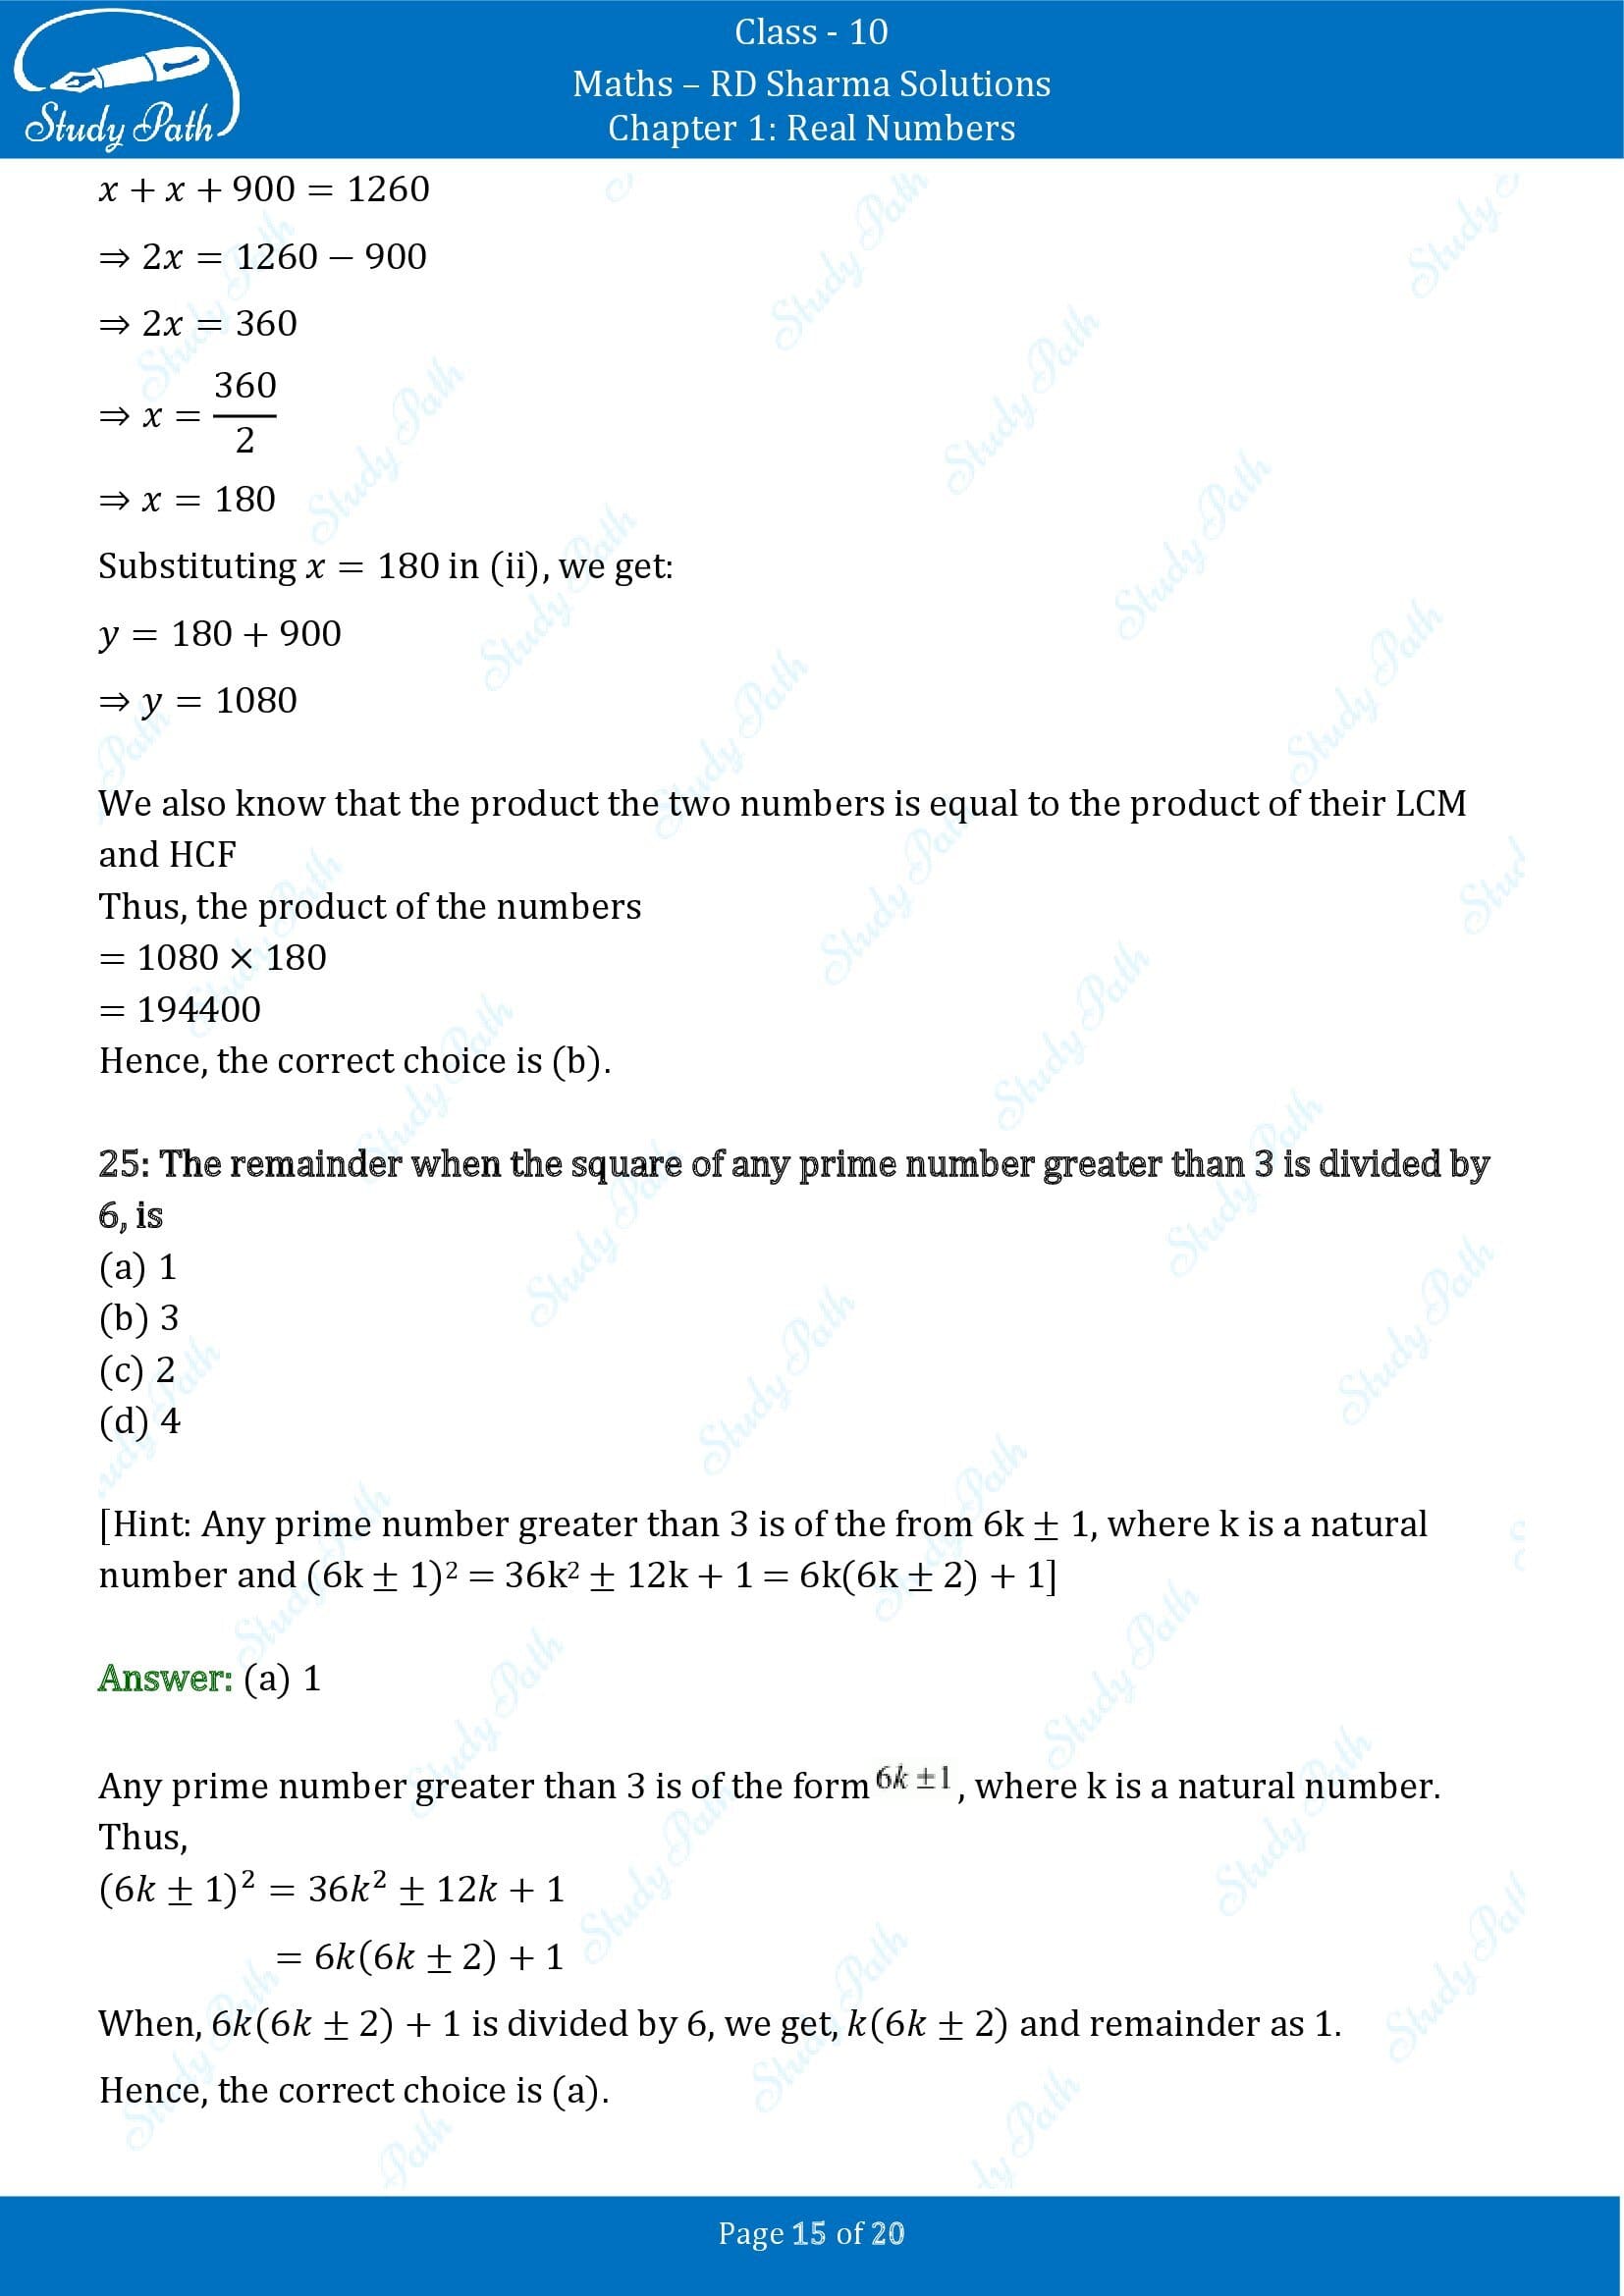 RD Sharma Solutions Class 10 Chapter 1 Real Numbers Multiple Choice Questions MCQs 00015